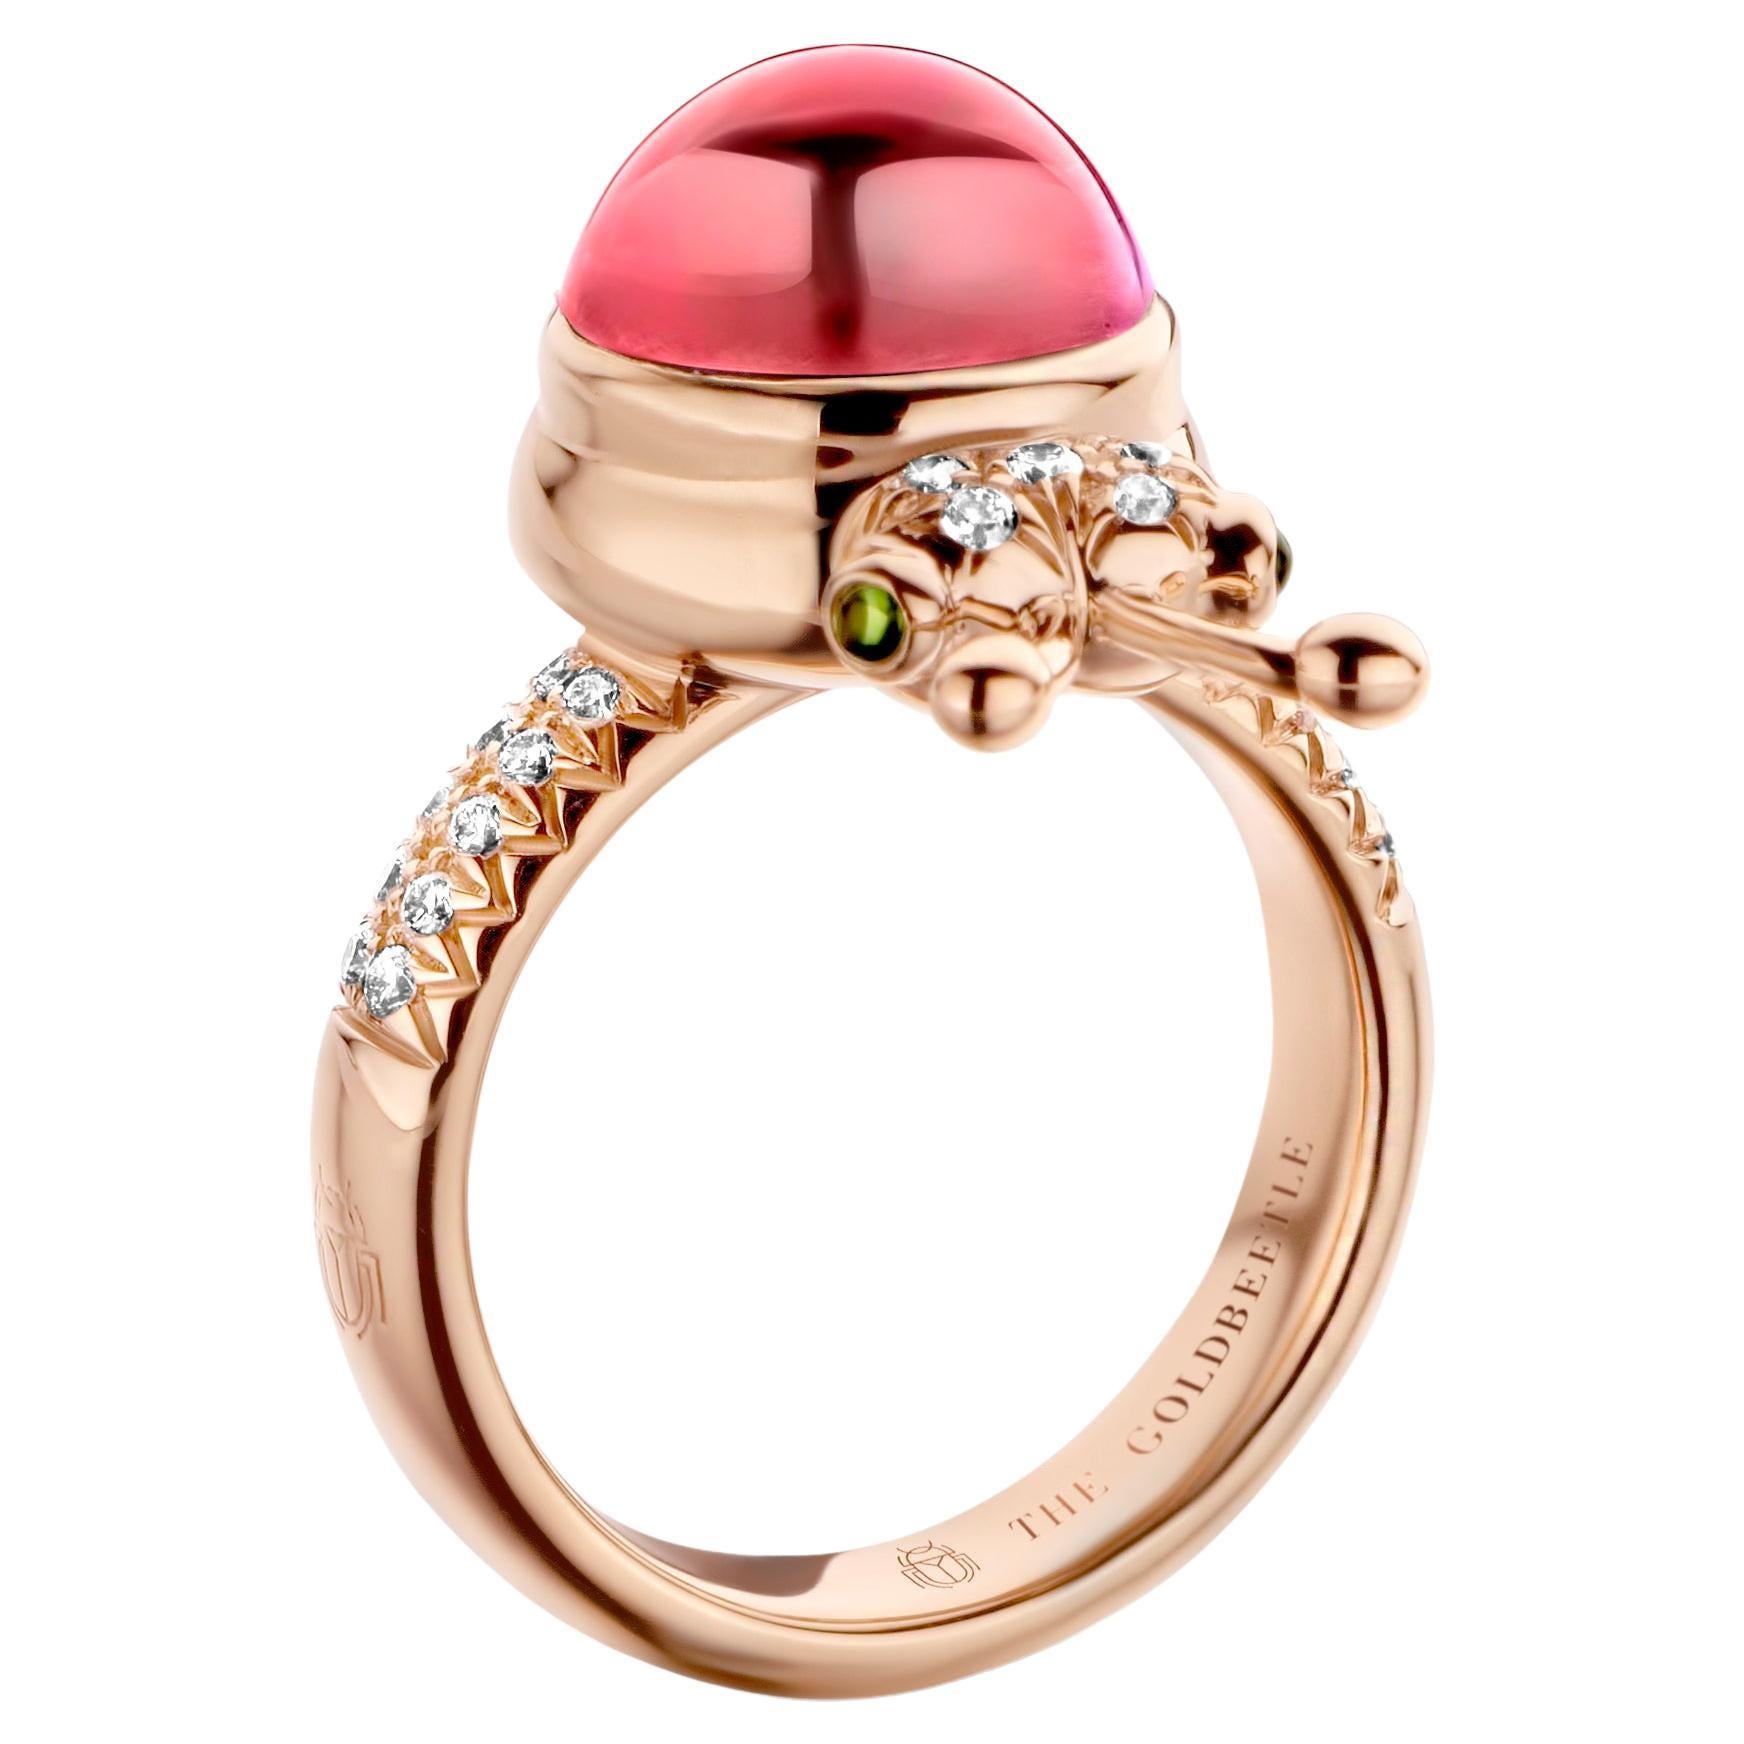 One-of-a-kind lucky beetle ring in 18K rose gold 10g set with the finest natural diamonds in brilliant cut 0,23Ct (VVS/DEF quality) one natural, pink tourmaline in round cabochon cut 6,00Ct and two tsavorites in round cabochon cut. Celine Roelens, a